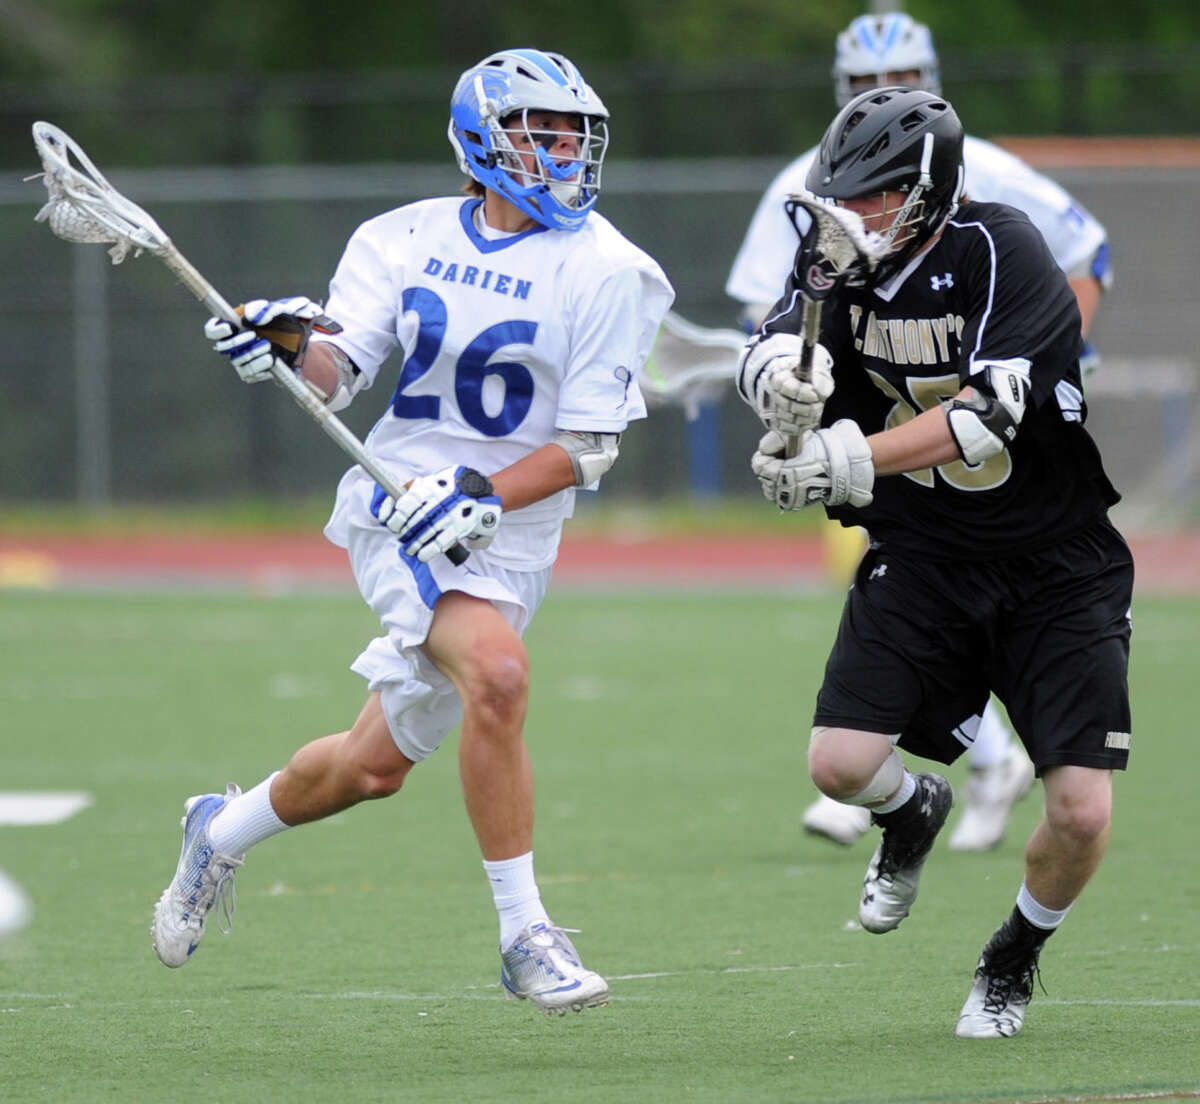 Darien's Peter Gesualdi controls the ball as he is defended by St. Anthony's Brendan Hurley during Saturday's game against St. Anthony's at Darien High School on May 5, 2012.